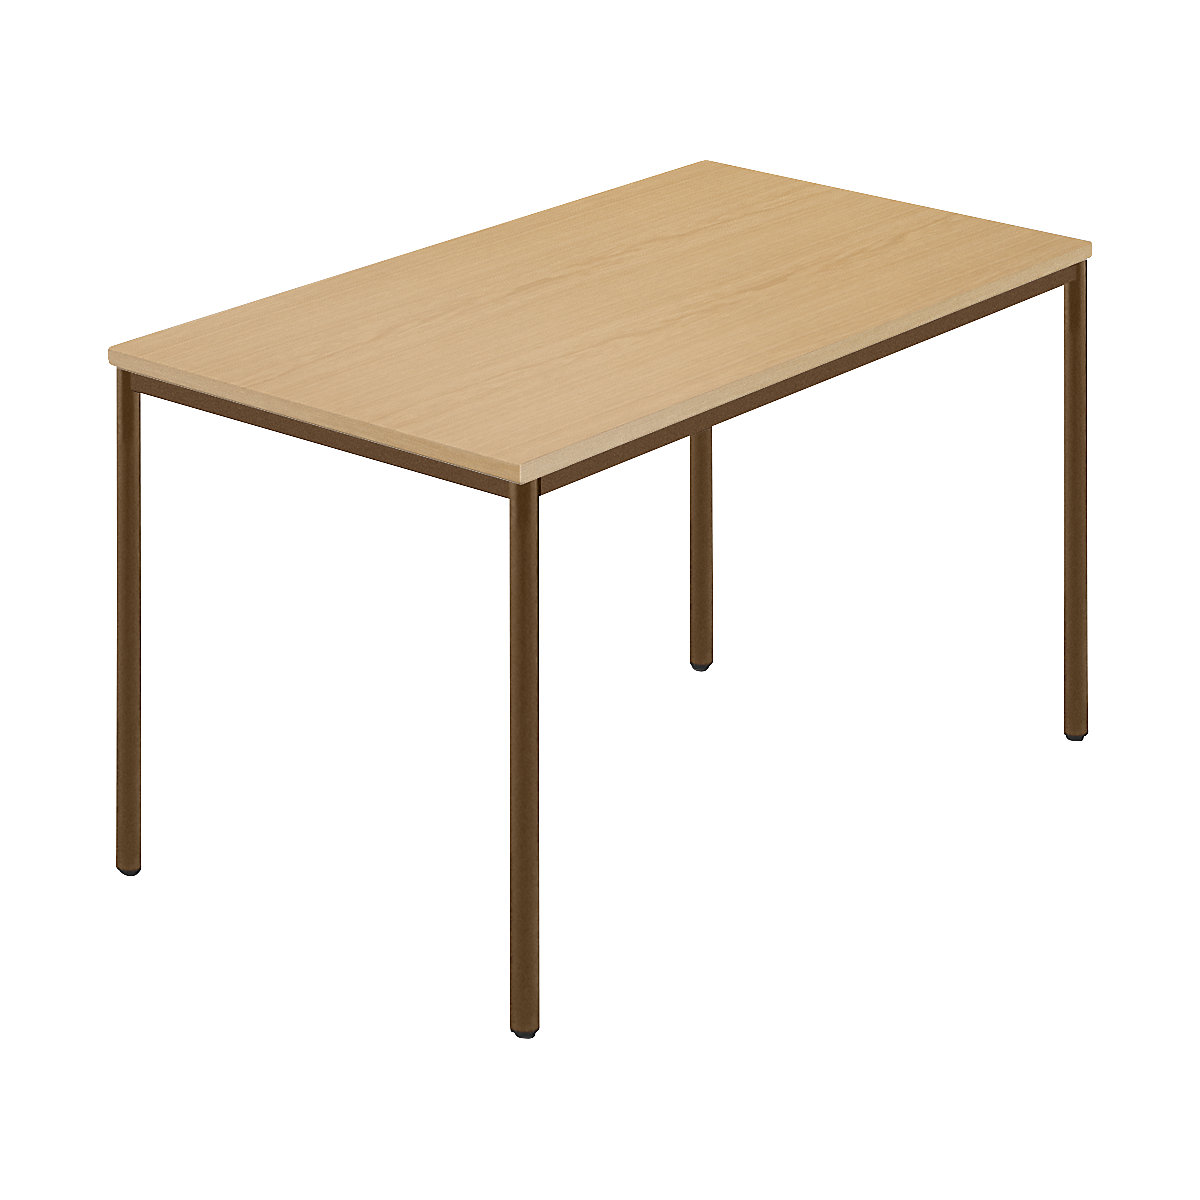 Rectangular table, coated round tubing, WxD 1200 x 800 mm, beech natural / brown-6